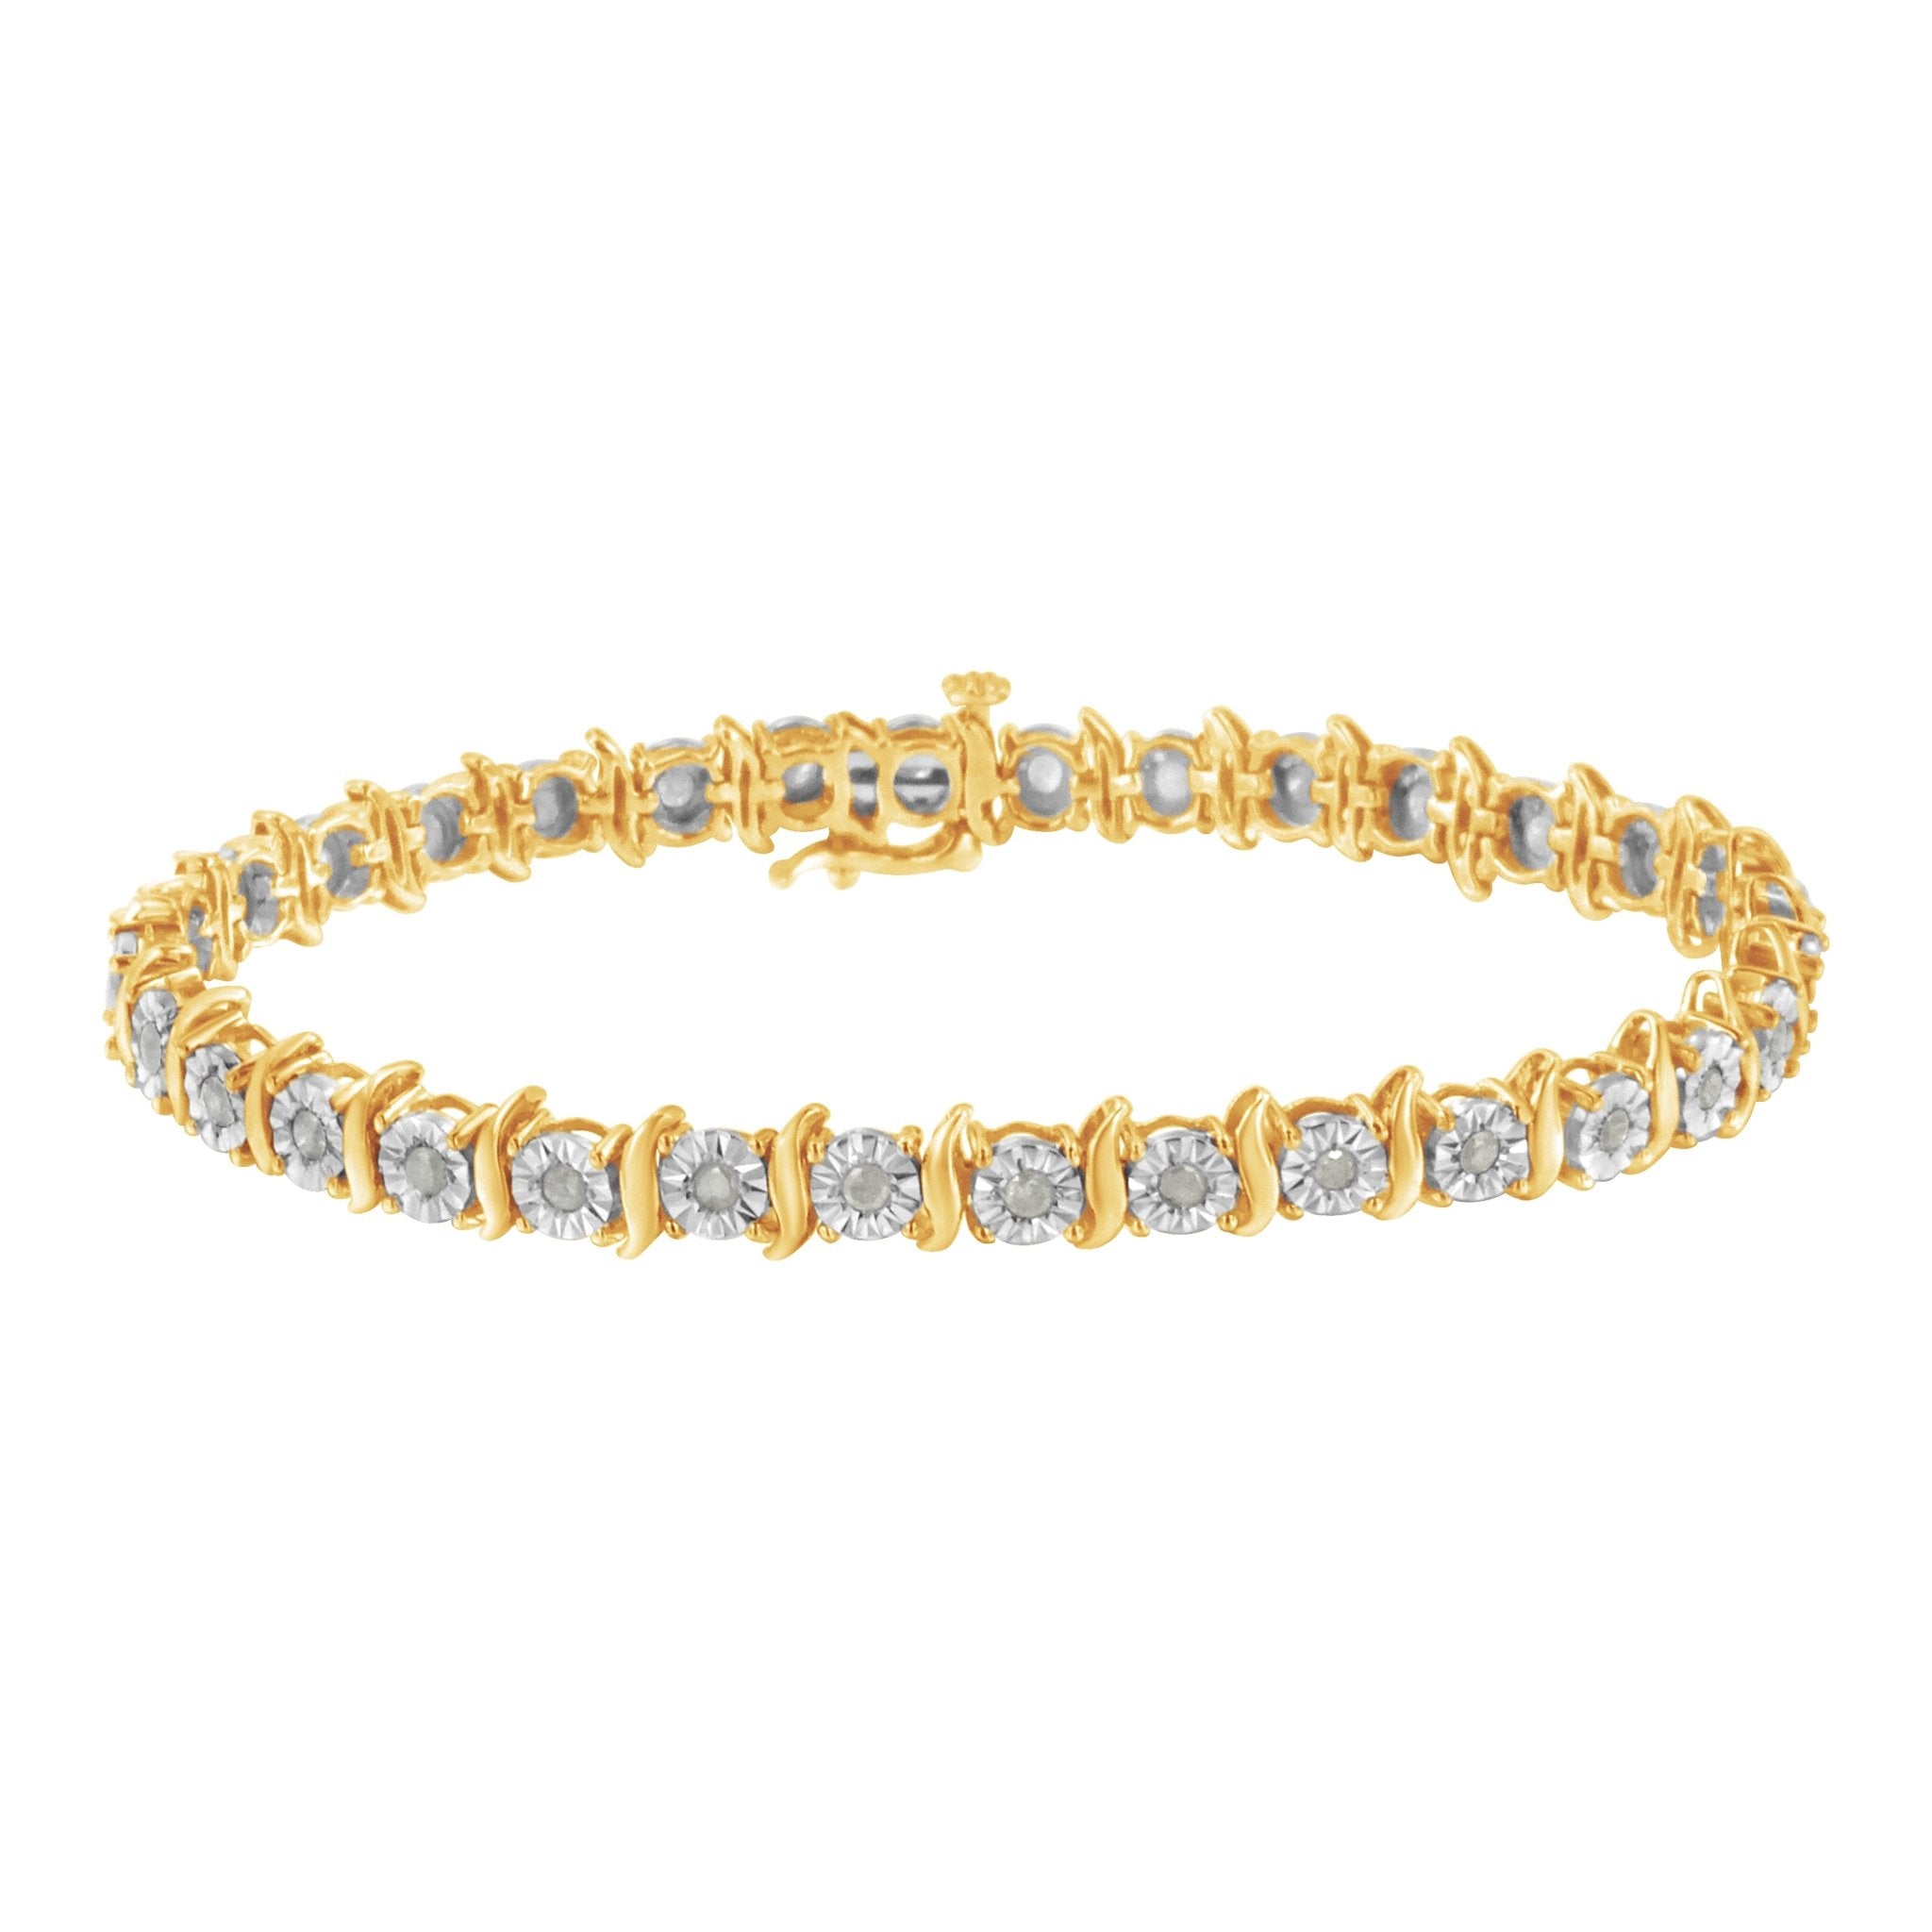 10K Yellow Gold Over .925 Sterling Silver 1.0 Cttw Diamond S-Curve Link Miracle-Set Tennis Bracelet (I-J Color, I3 Clarity) - 7